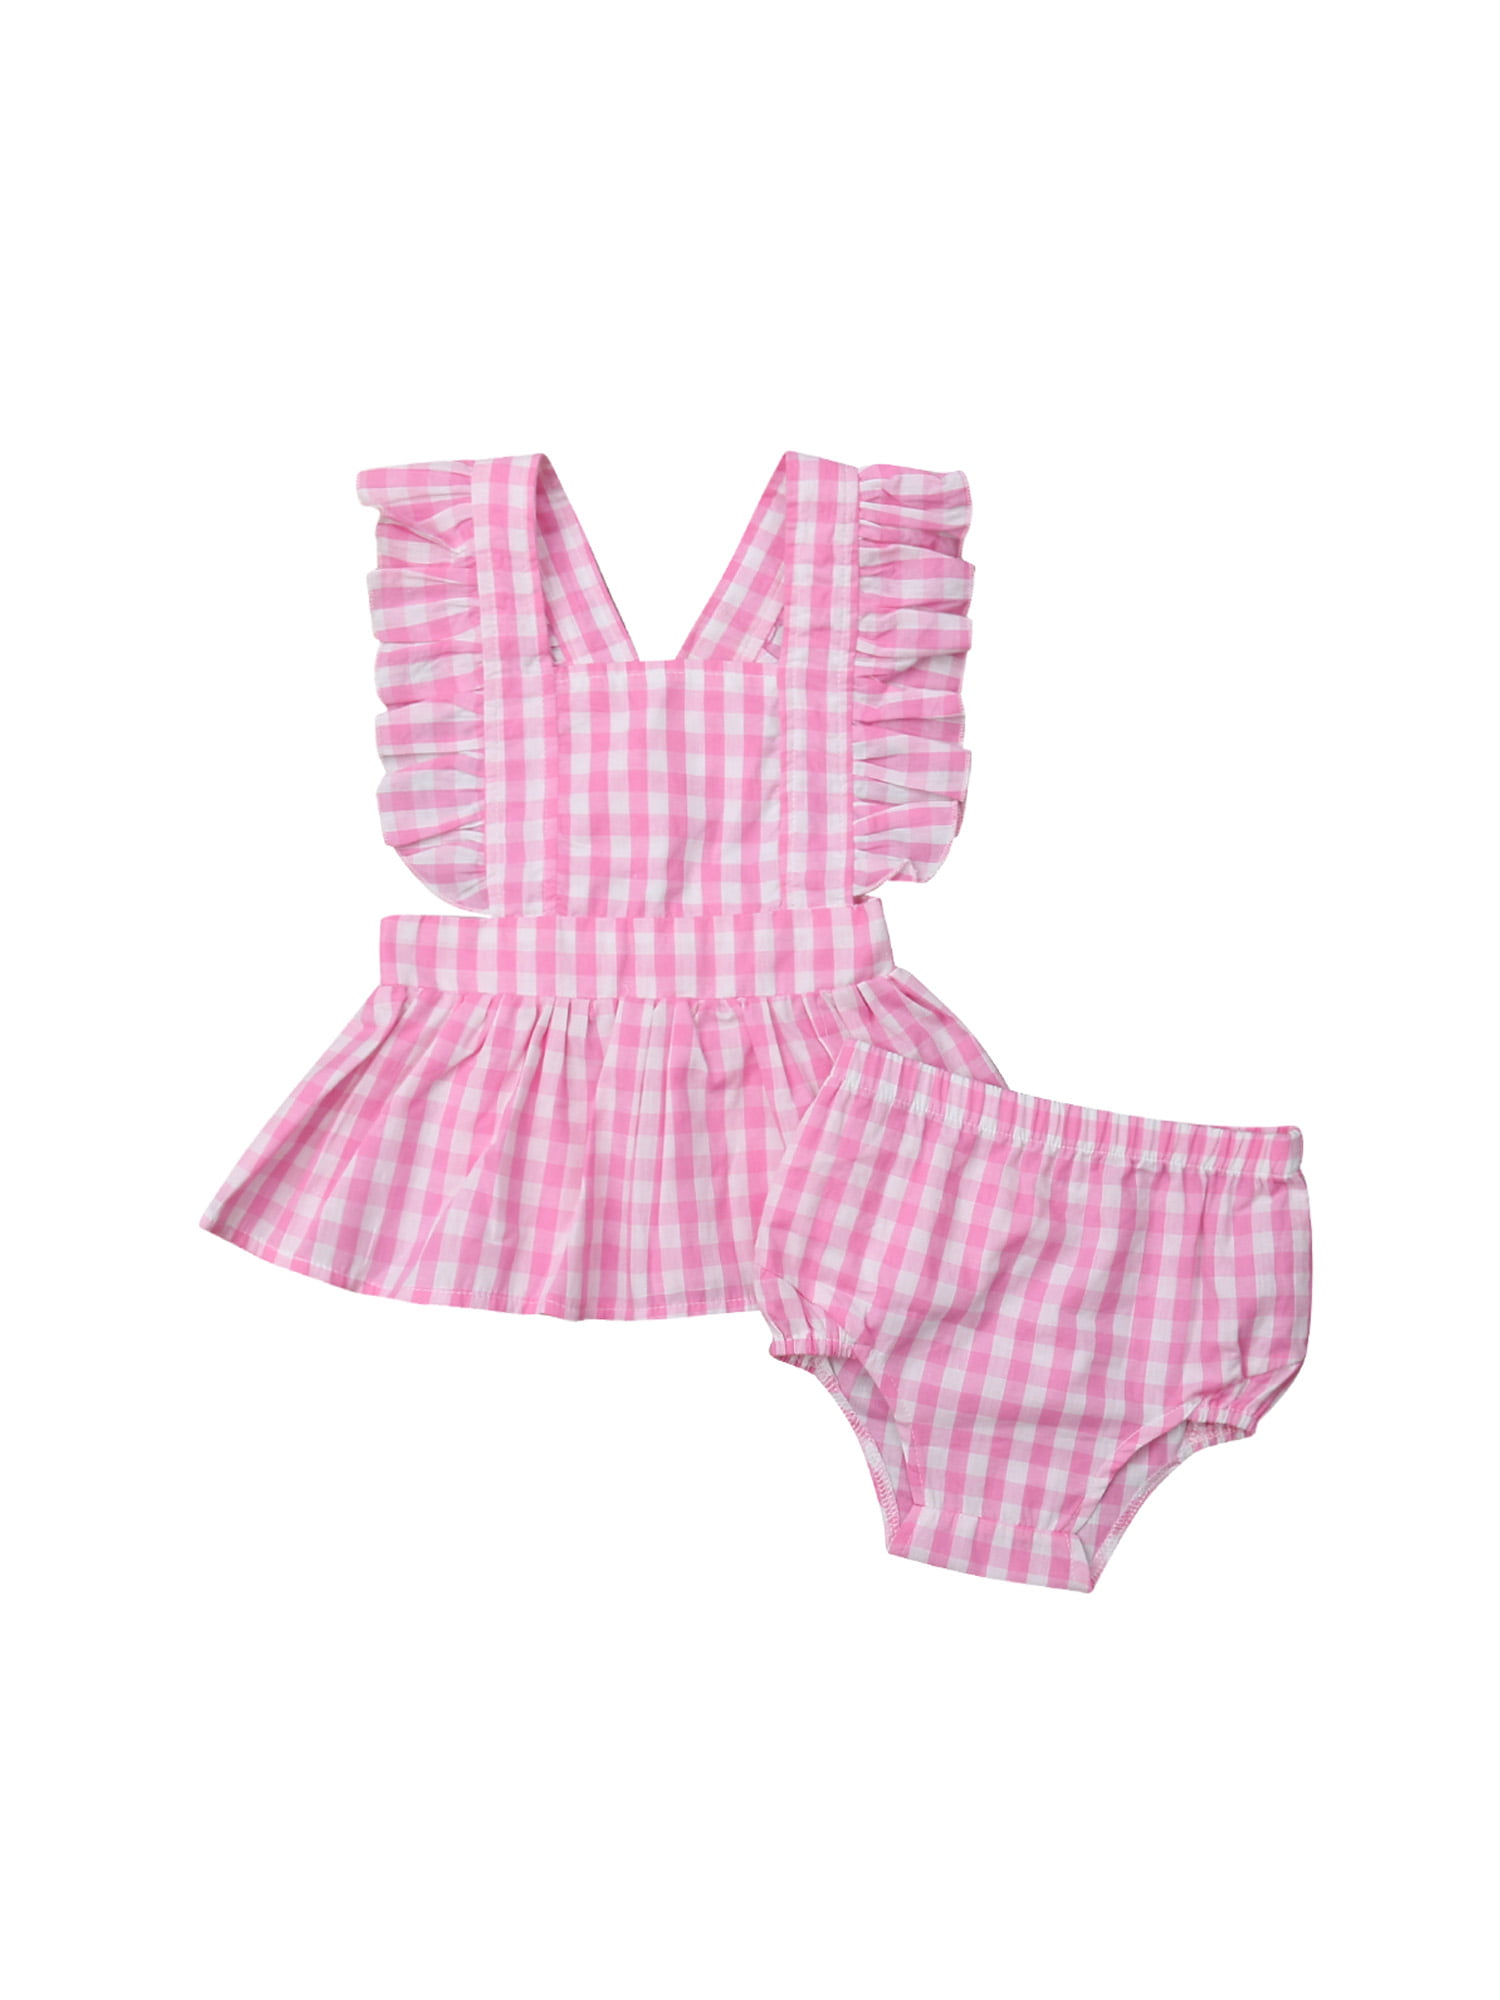 Summer Toddler Baby Girl Ruffle Tops Dress Shorts Plaids Outfits Set Clothes